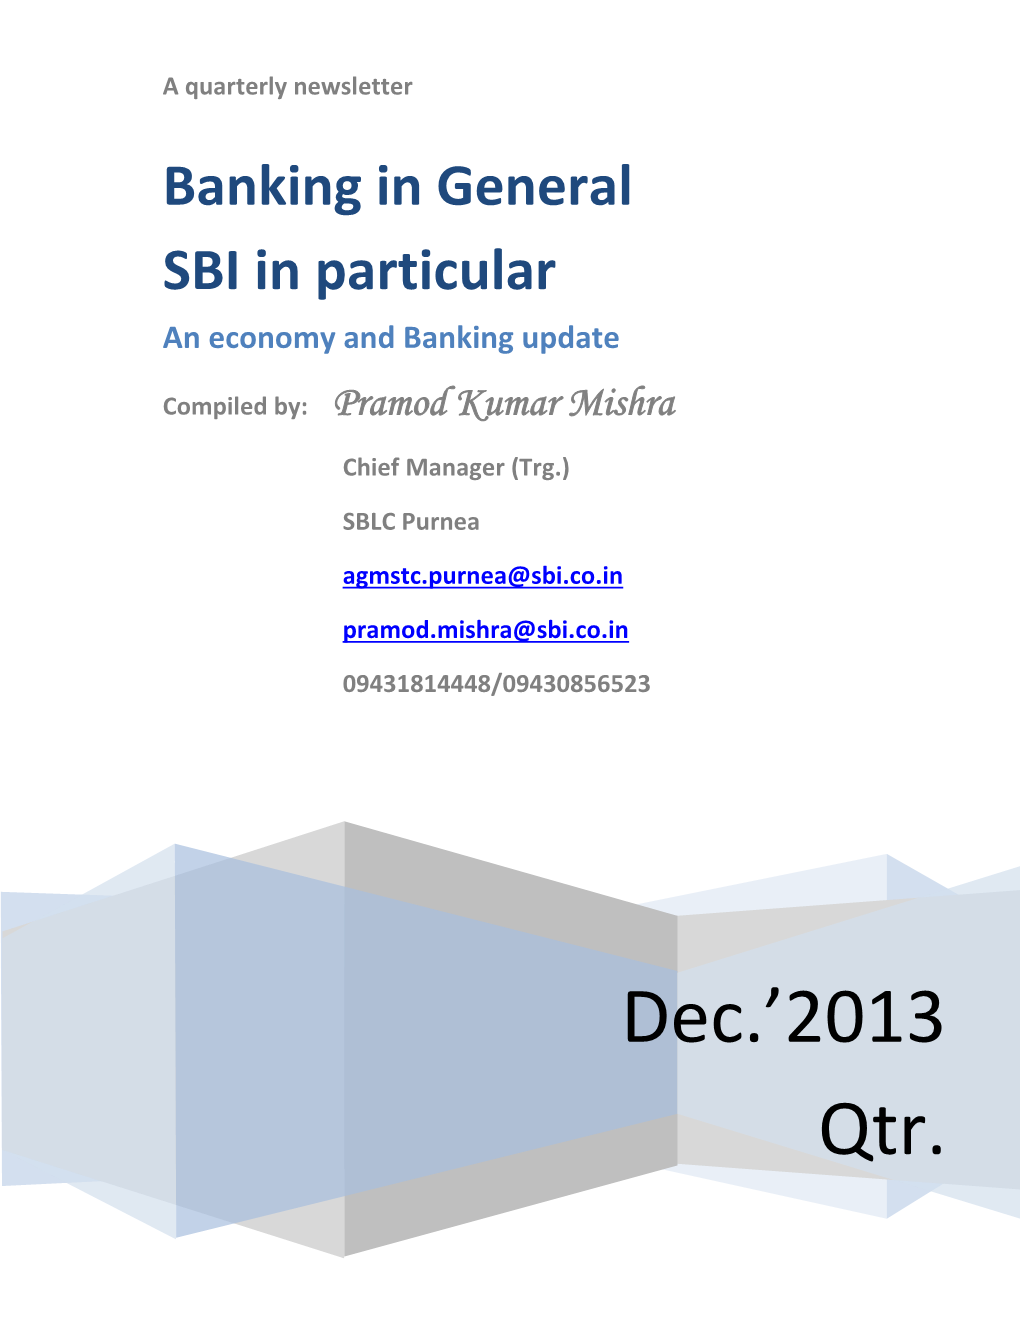 Banking in General SBI in Particular an Economy and Banking Update